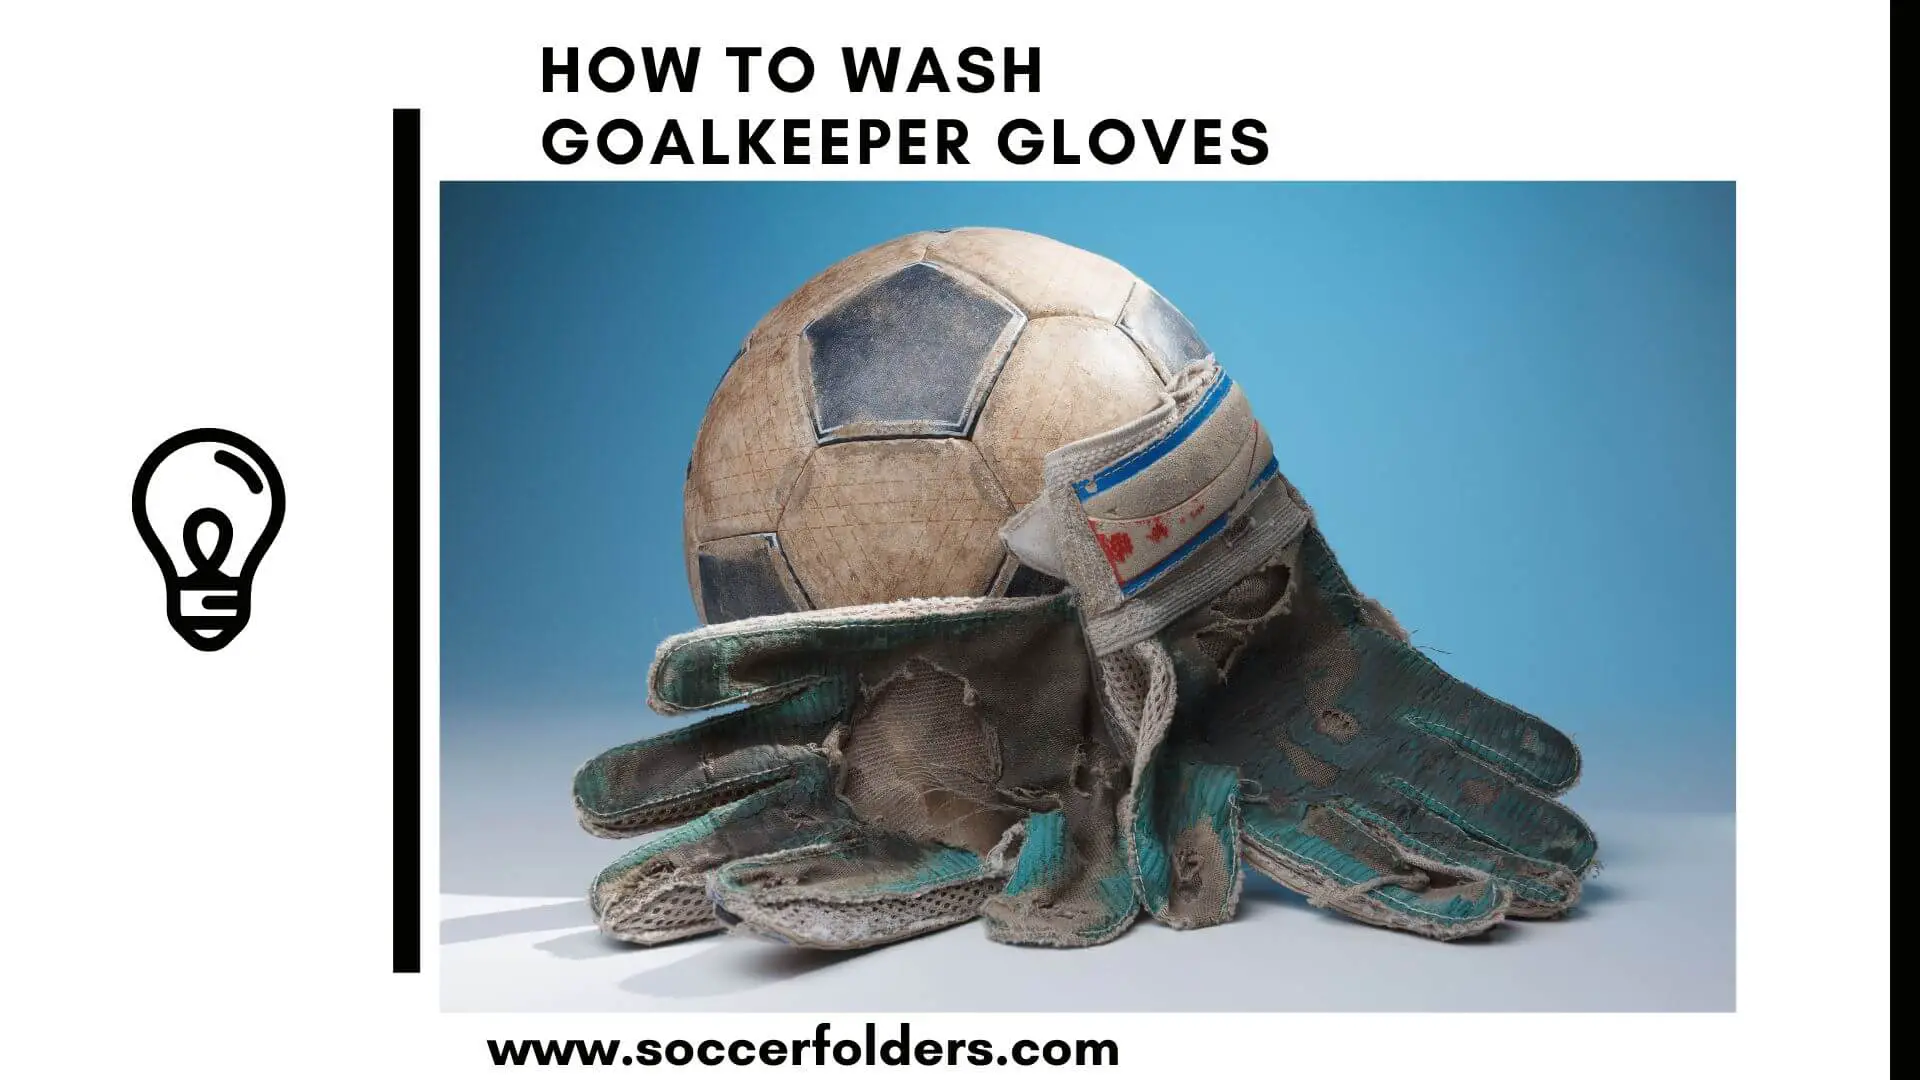 How to wash goalkeeper gloves - Featured image